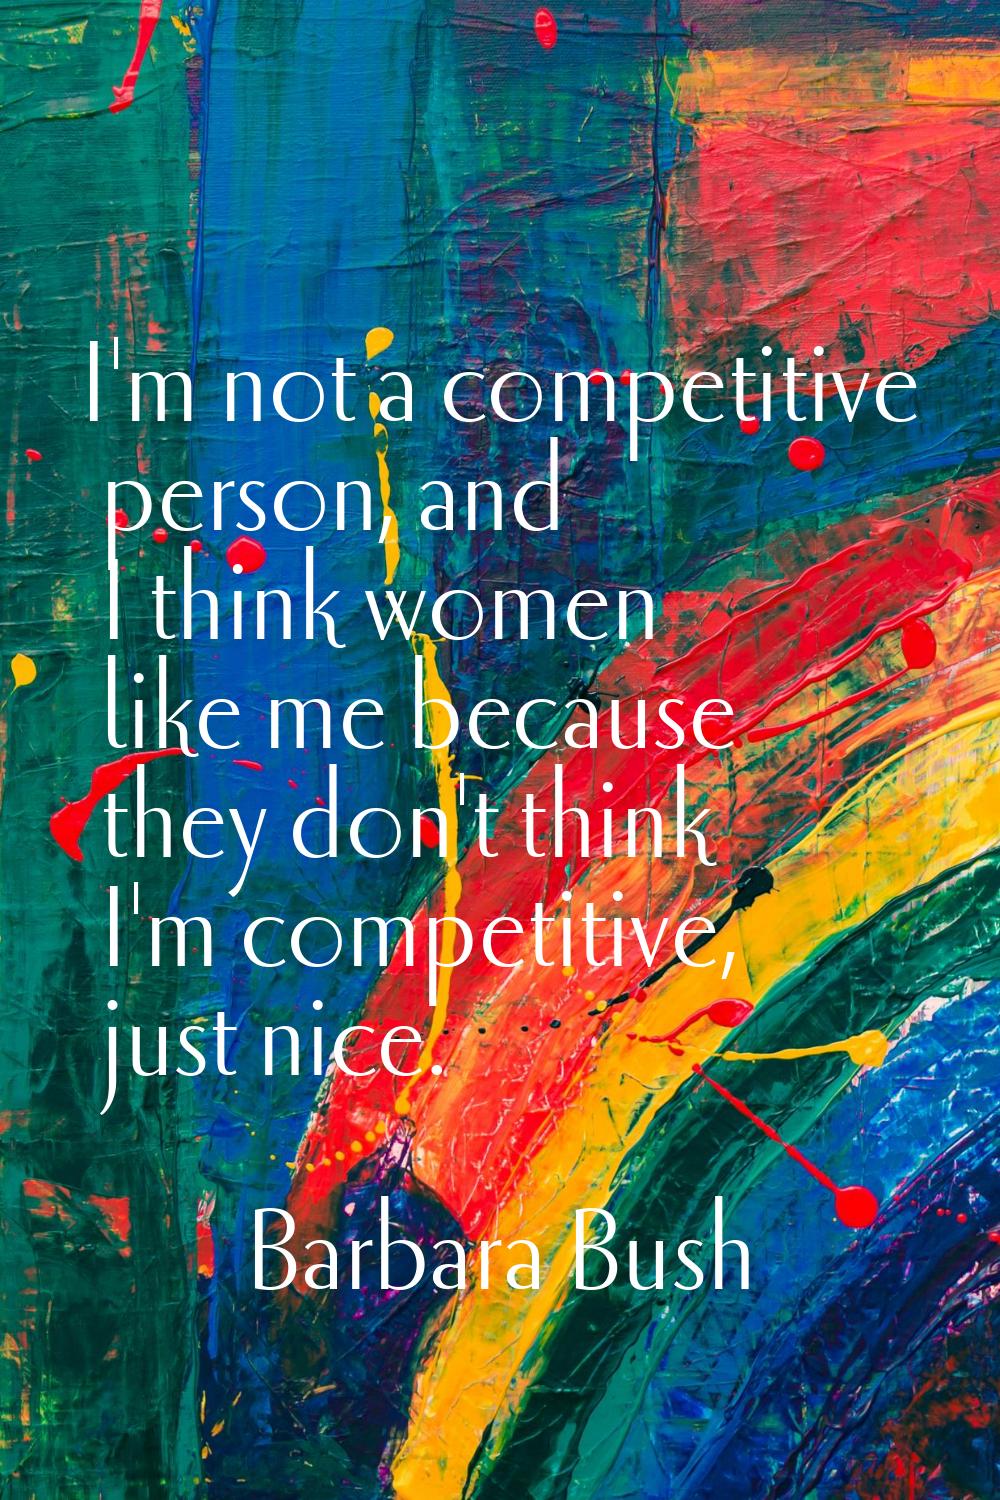 I'm not a competitive person, and I think women like me because they don't think I'm competitive, j